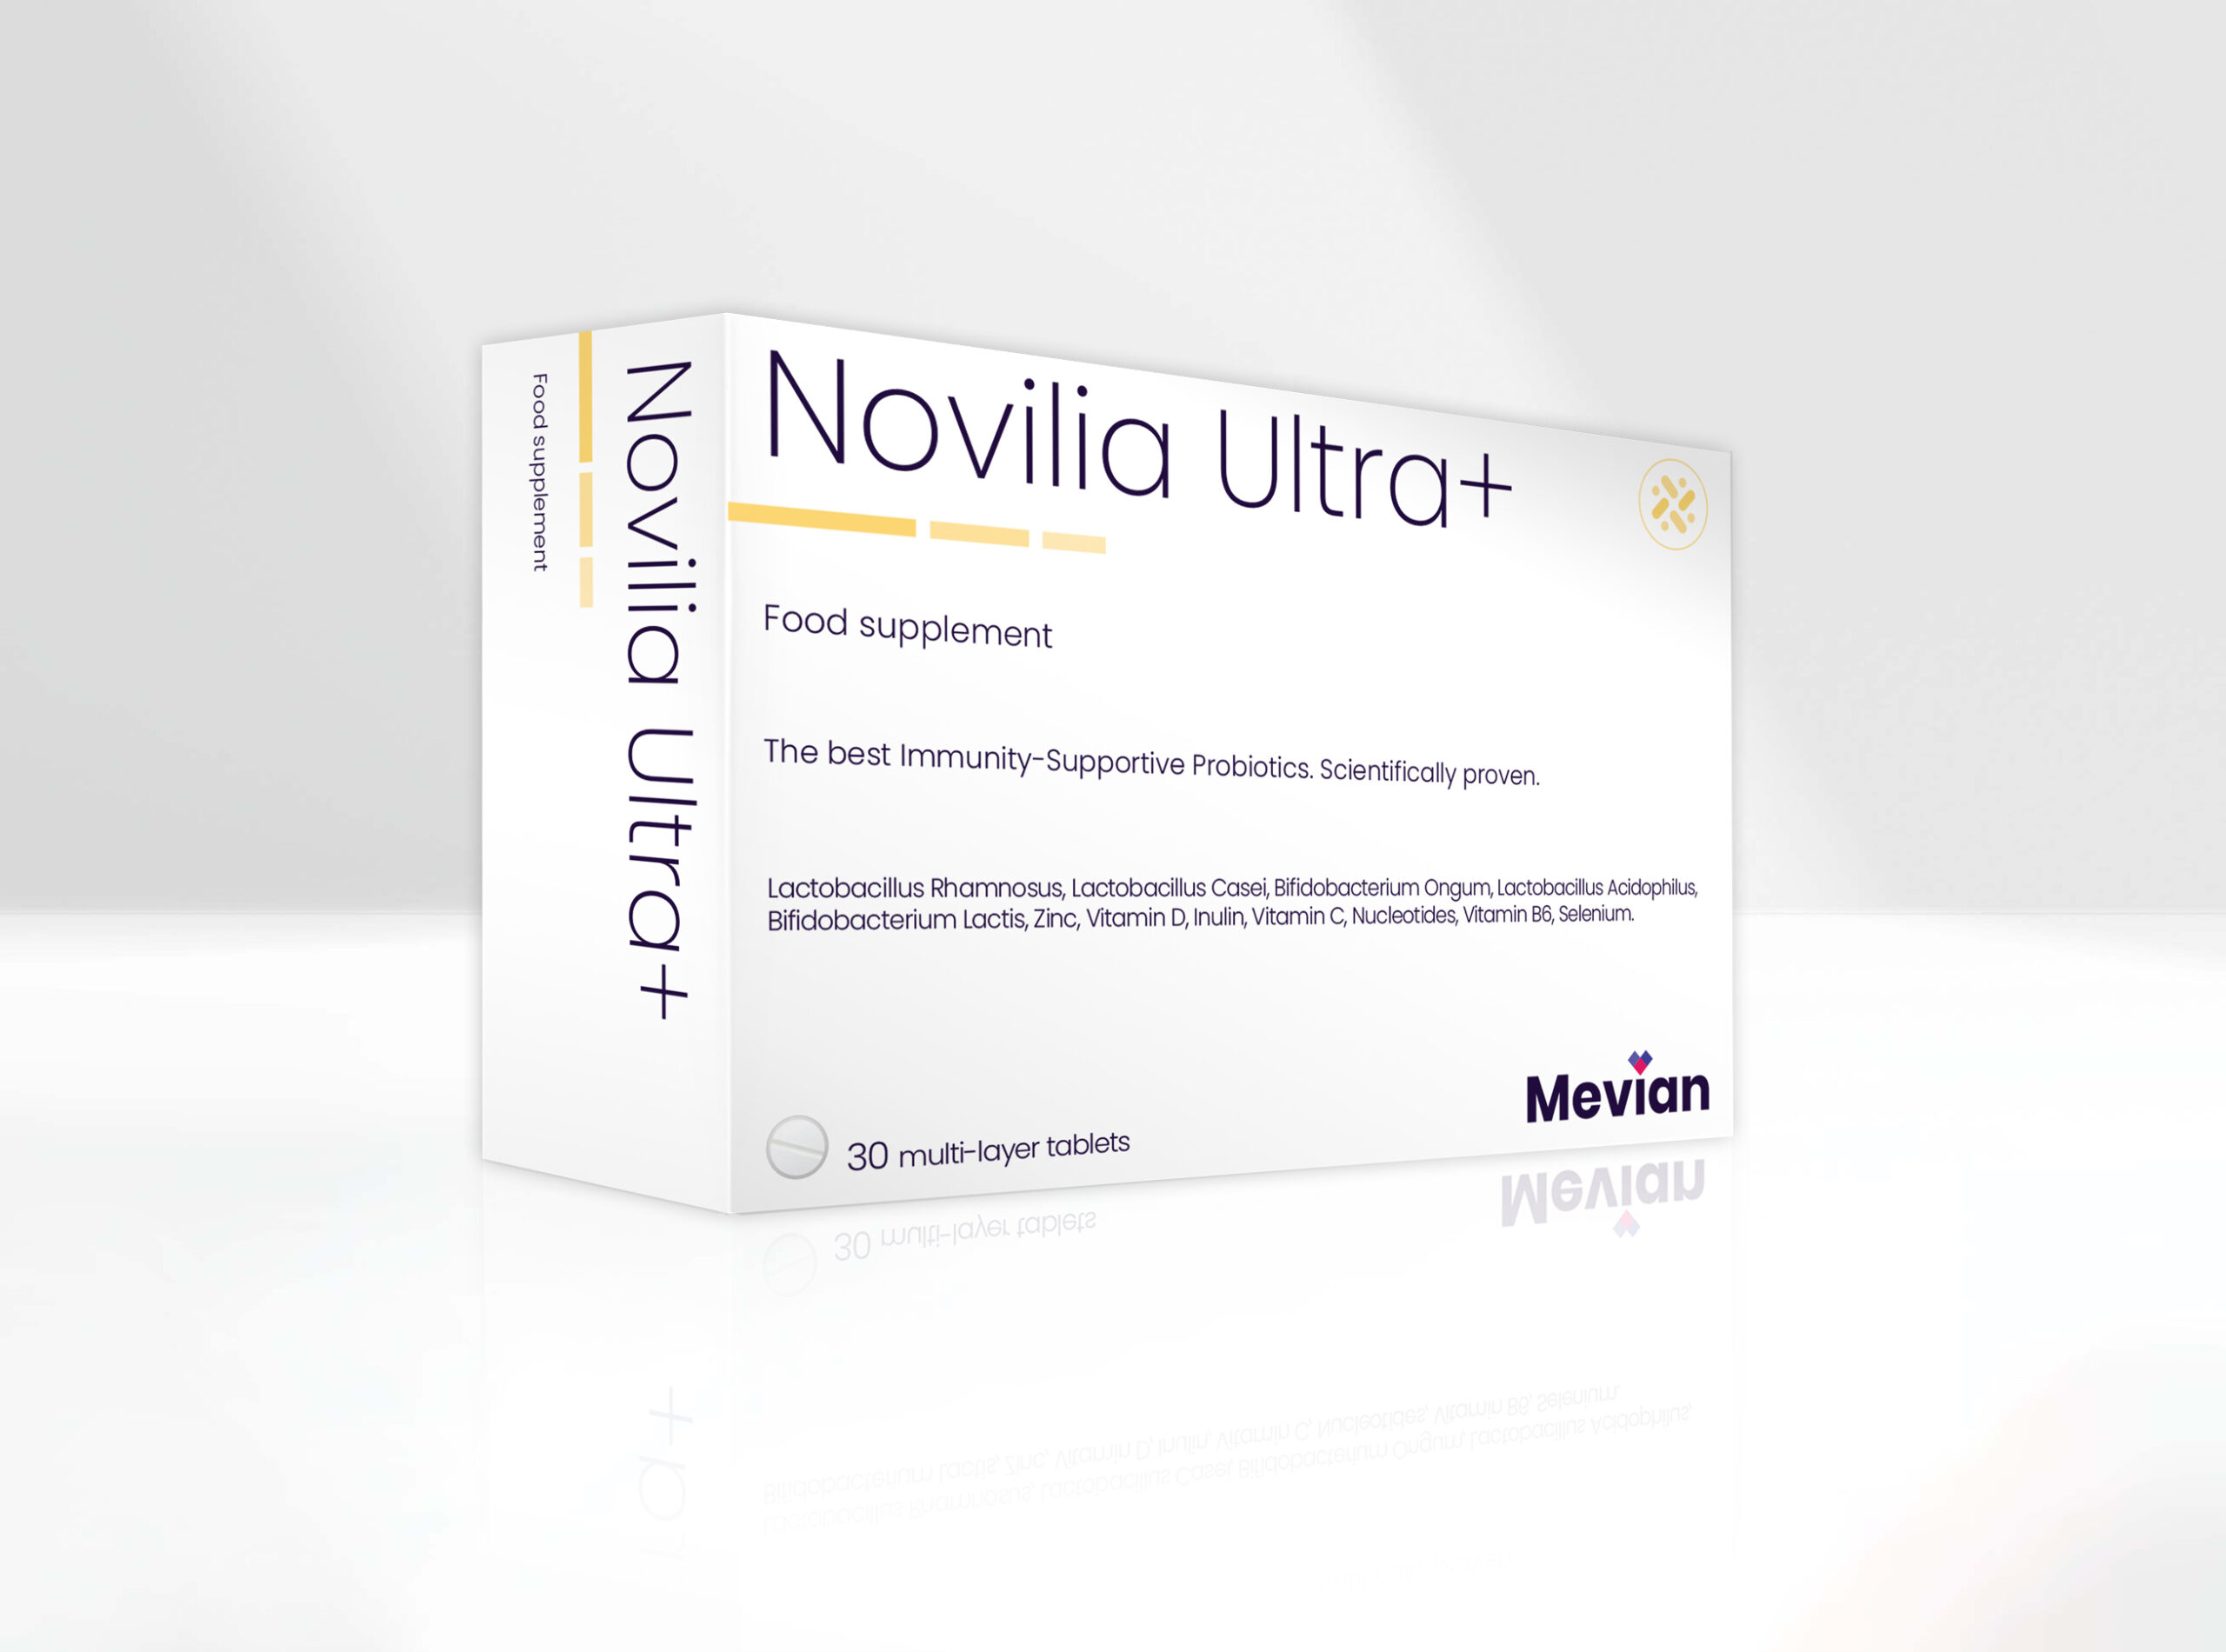 Novilia Ultra+ is the most enhanced potent version of probiotics for boosting immunity and for providing soothing action of the viral infection symptoms, suitable for adults and adolescents.